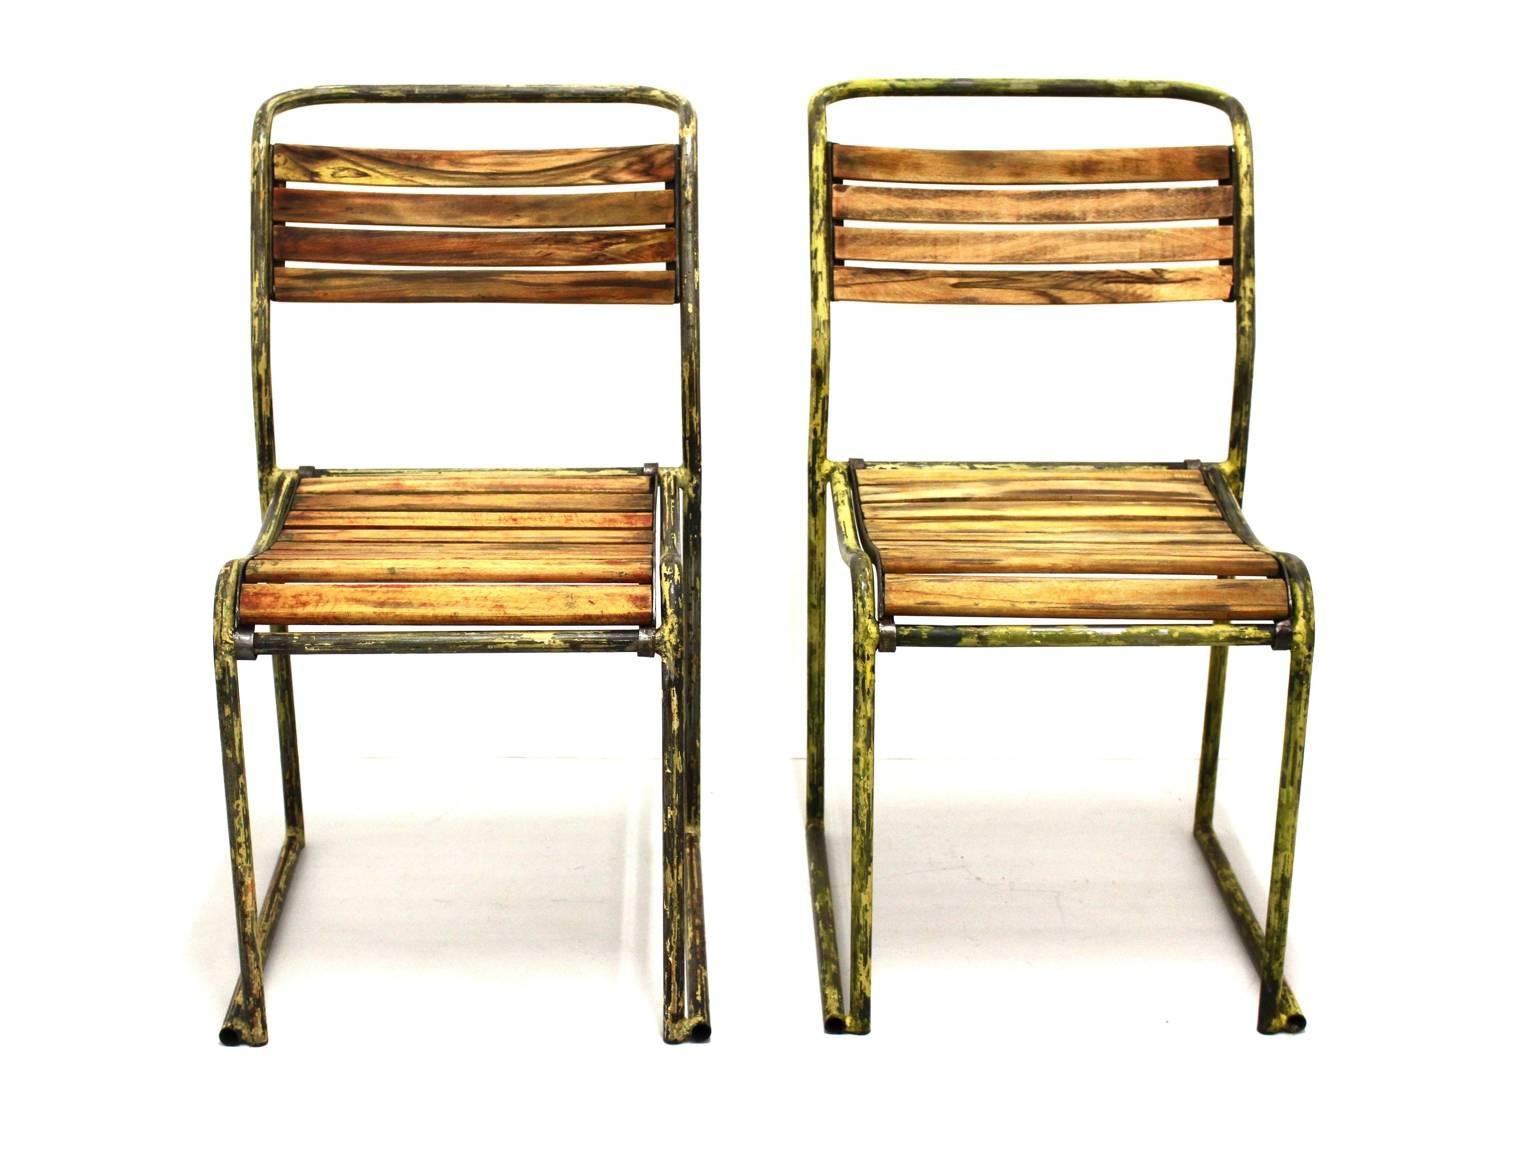 Art Deco vintage steel chairs model RP6 by Bruno Pollak 1931-1932 and manufactured by PEL Ltd. England.
The beechwood slats and the tubular steel from this rare pair of chairs show lovely rests from yellow enamel. 
Also they are carefully cleaned